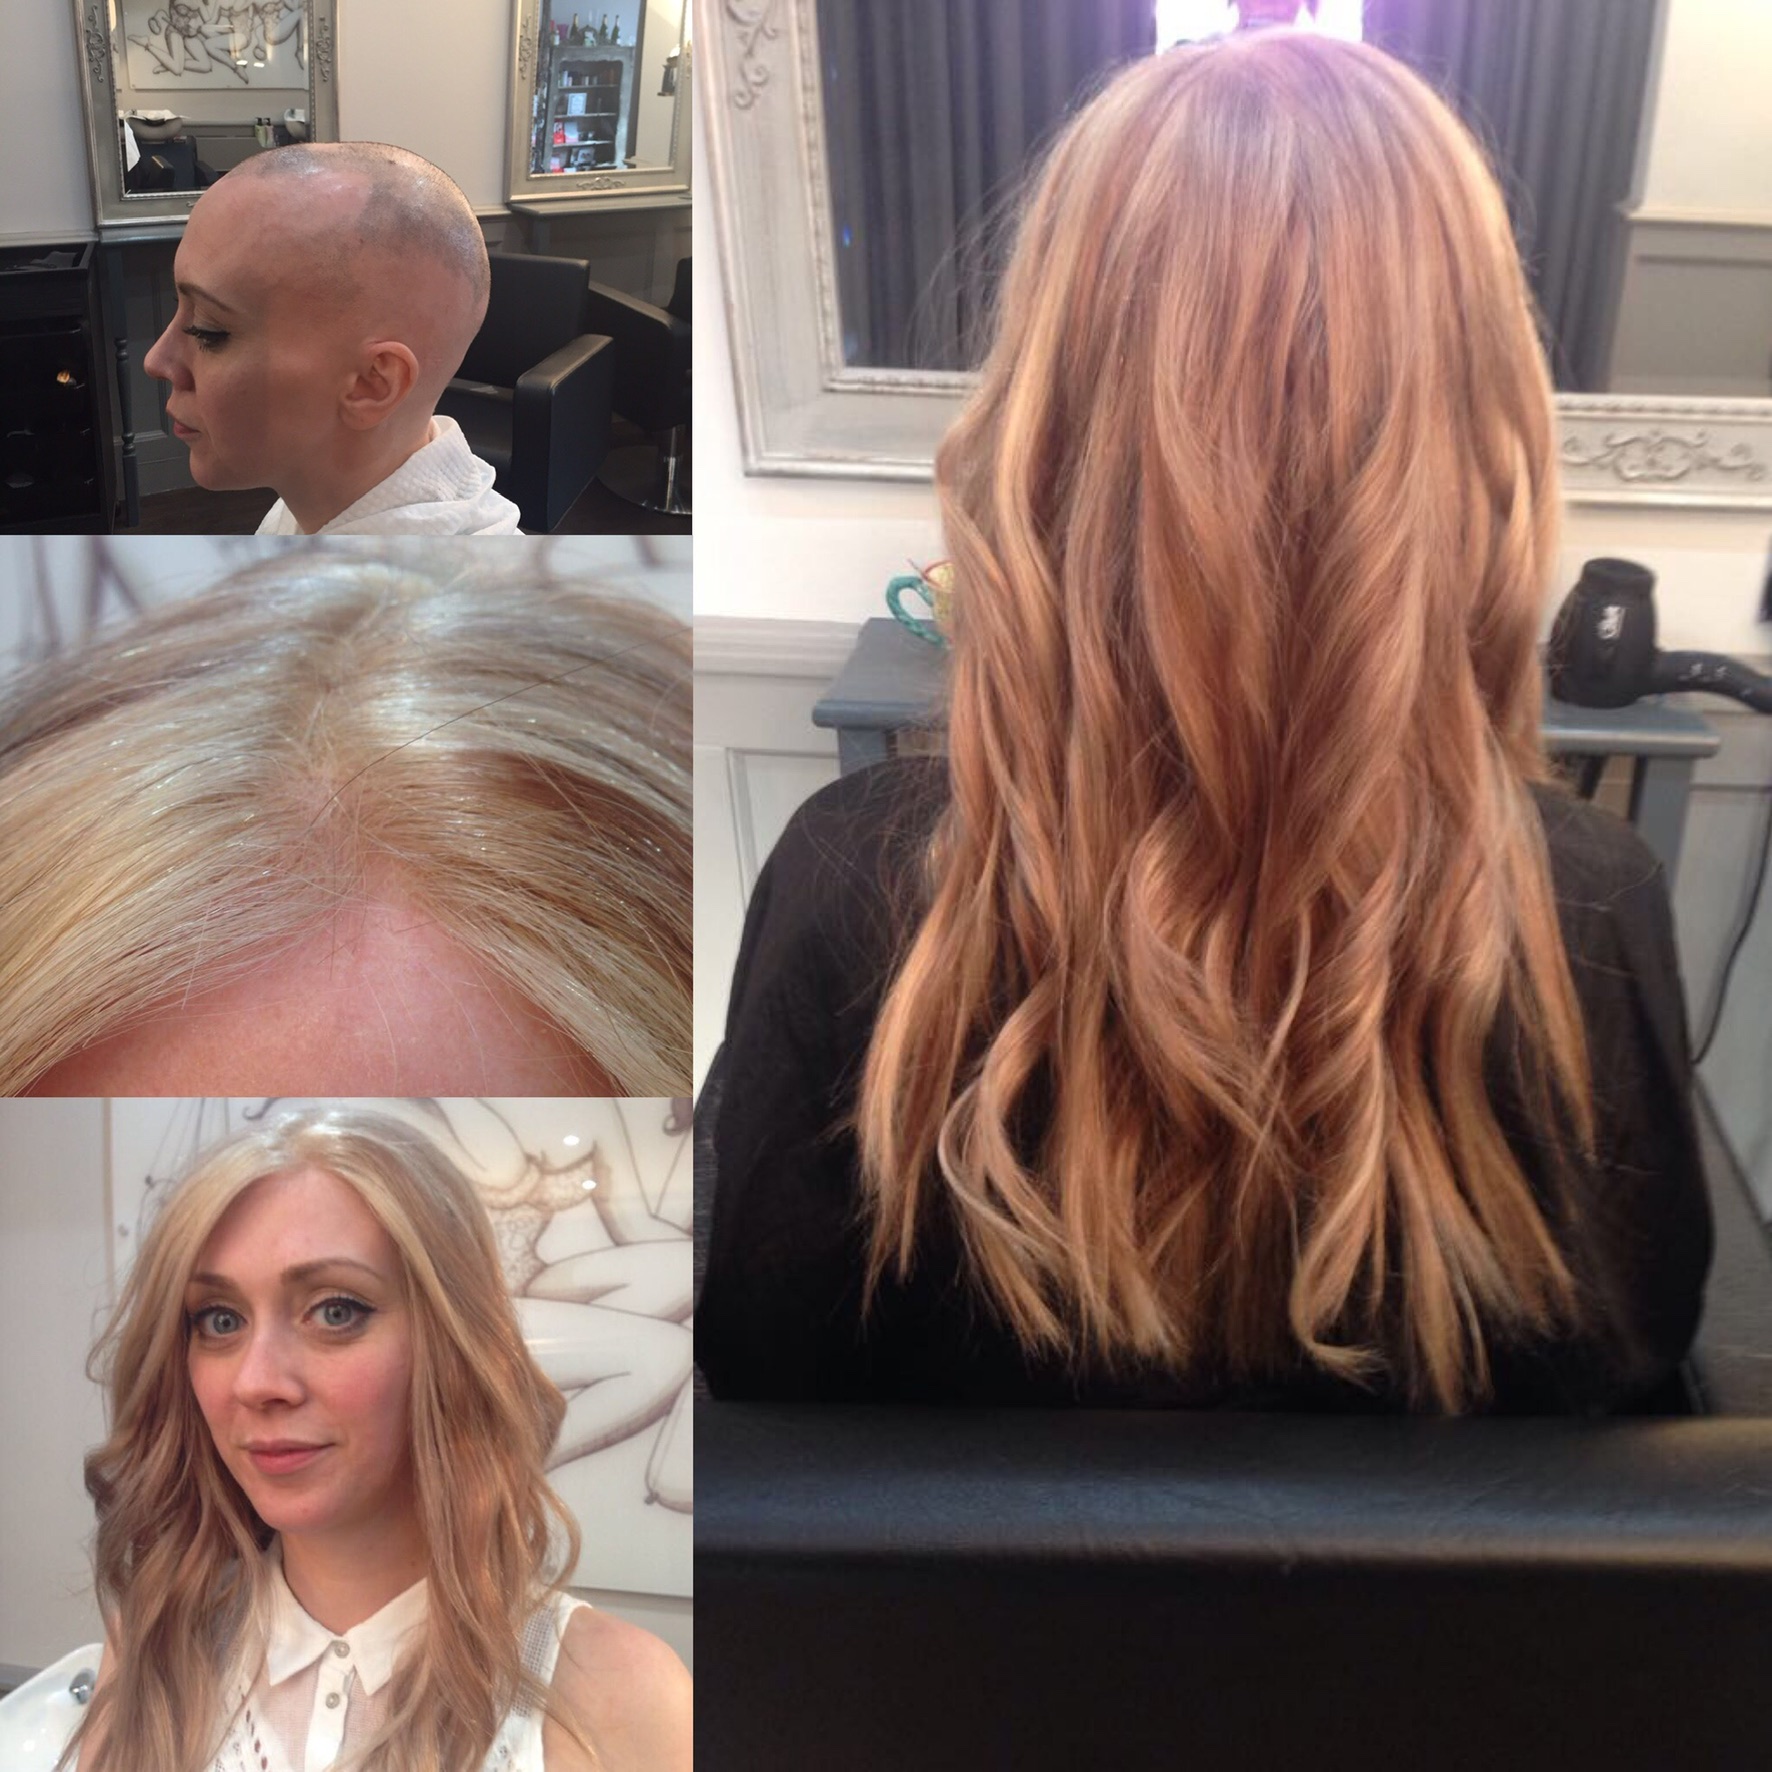 Hair replacement with blonde hair on woman